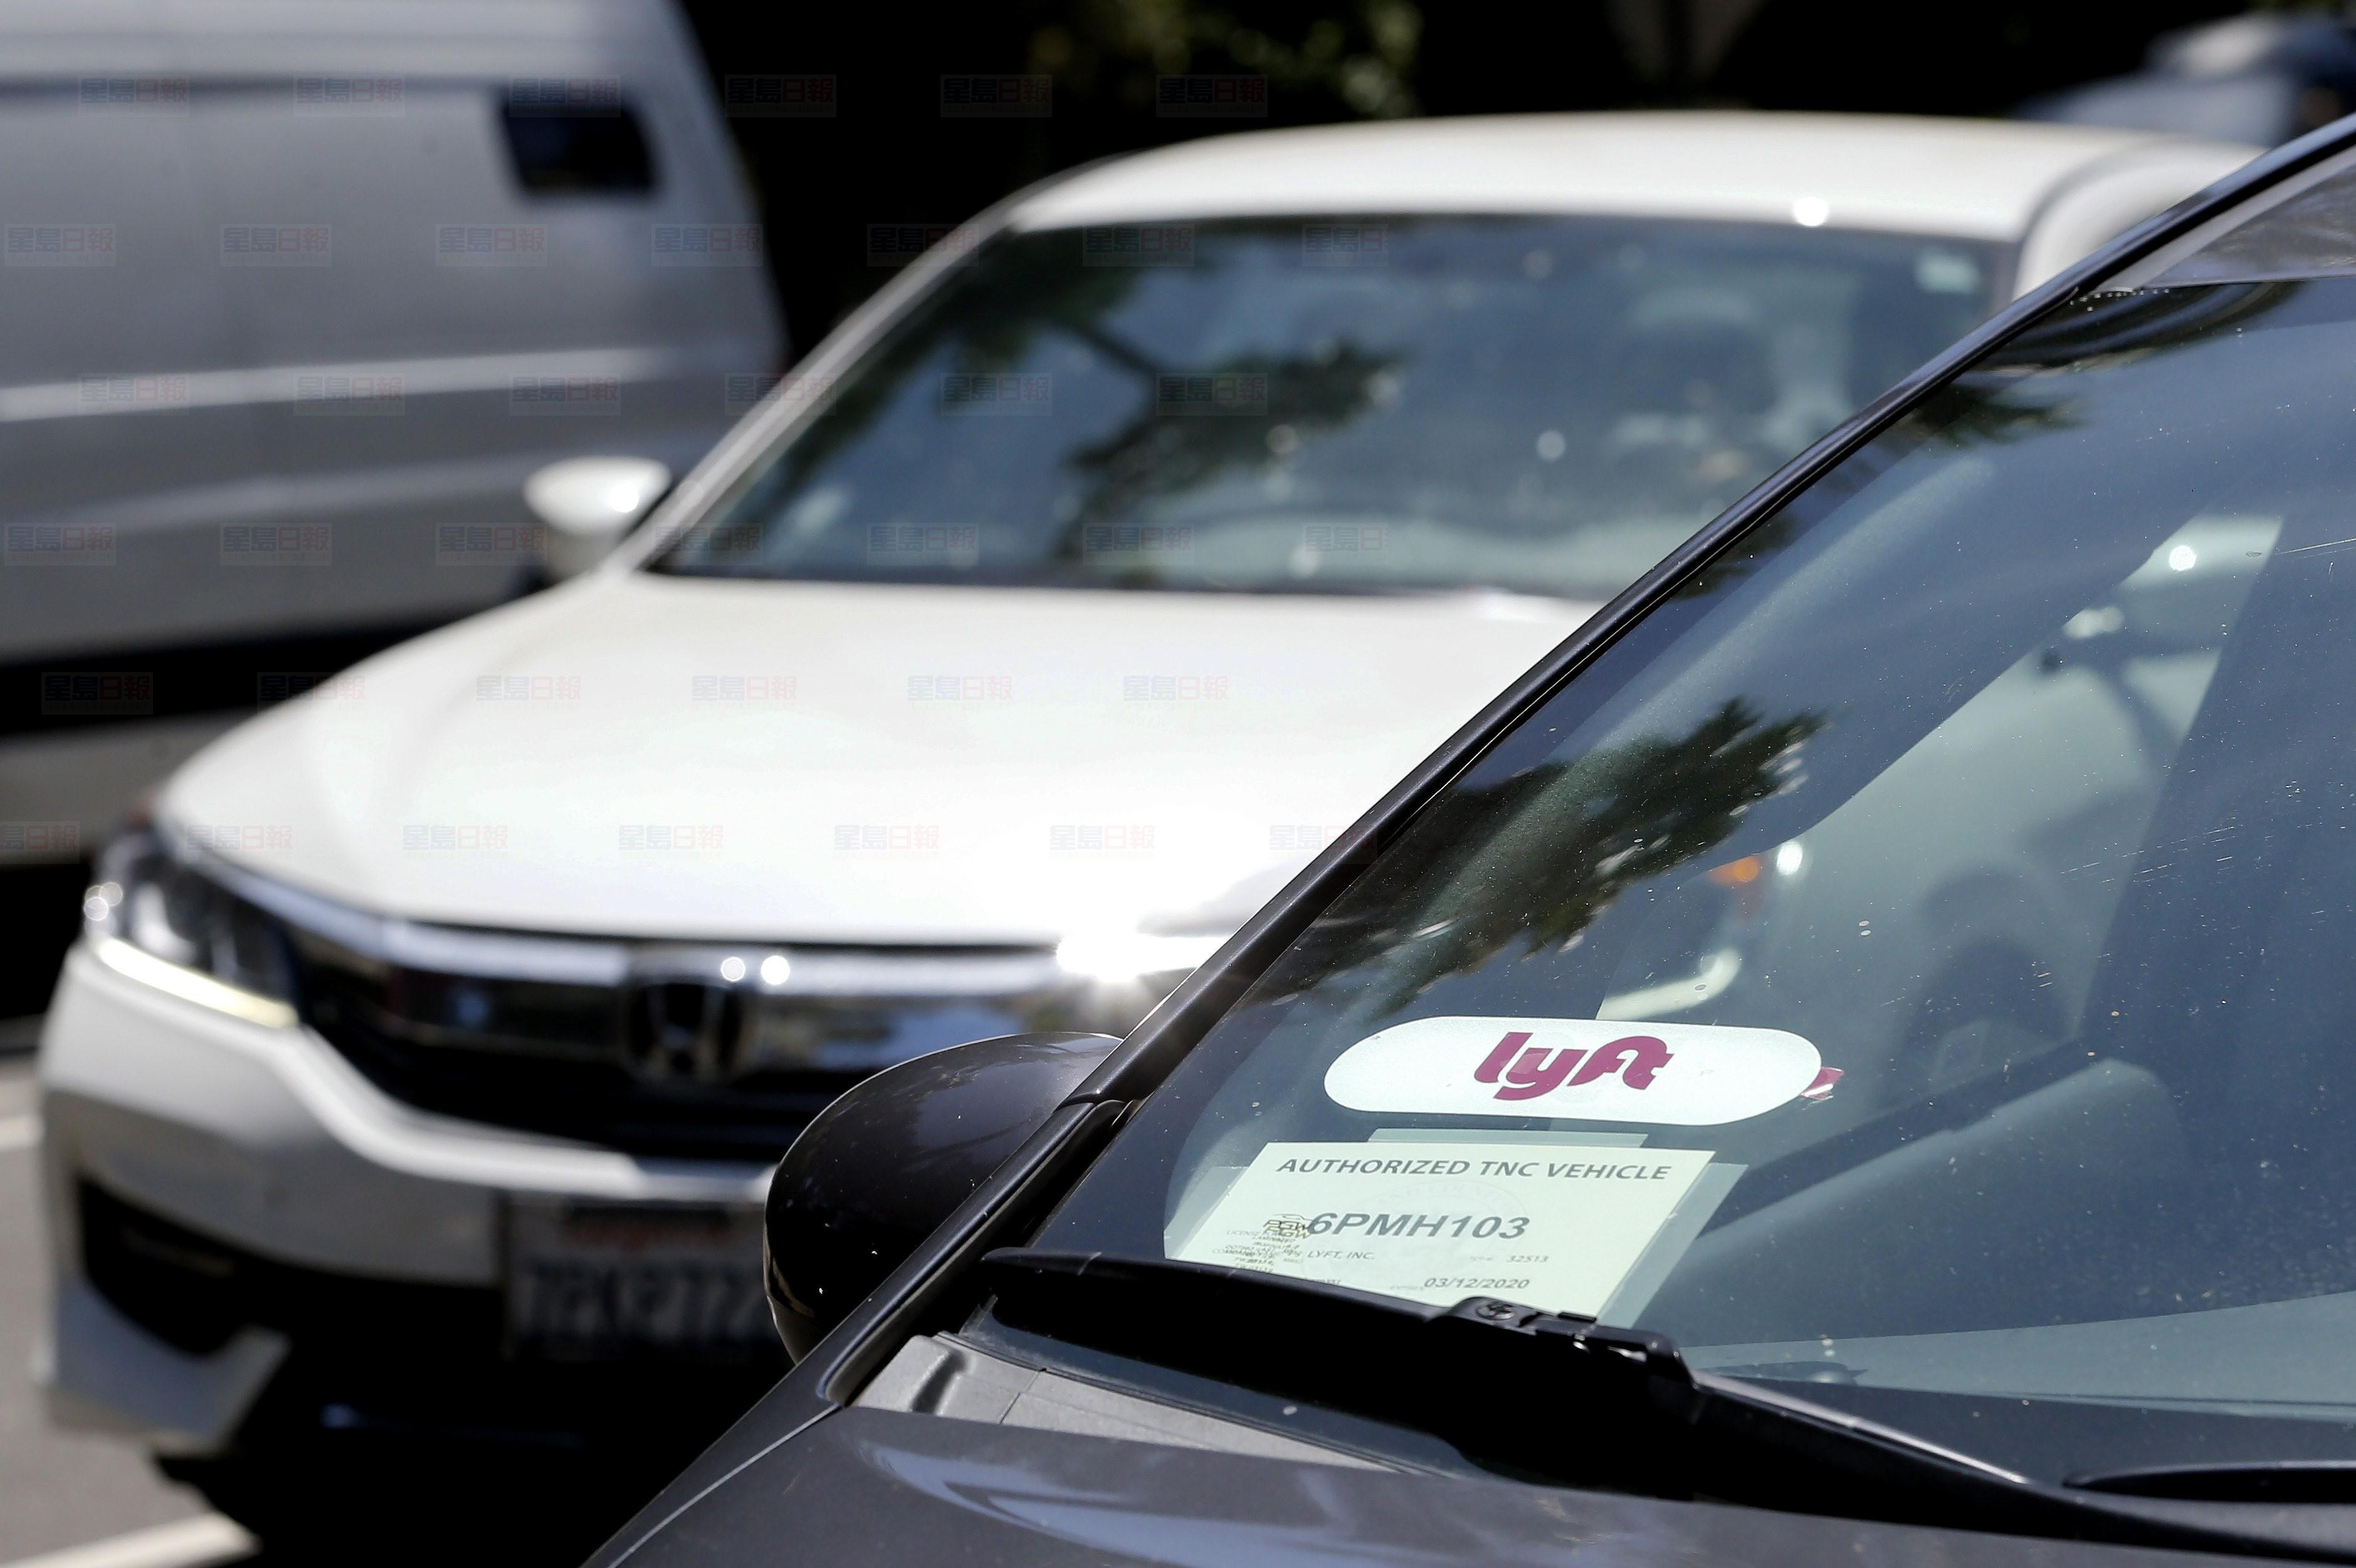 A Lyft ride-share car waits at a stoplight in Sacramento, Calif. on July 9, 2019. Ride-hailing company Lyft says it plans to be operating in Vancouver before the end of this year.The Passenger Transportation Board in B.C. has yet to unveil its final regulations for ride-hailing companies, but a statement from Lyft says the company is confident operations will begin in the Lower Mainland sometime this fall. THE CANADIAN PRESS/AP, Rich Pedroncelli